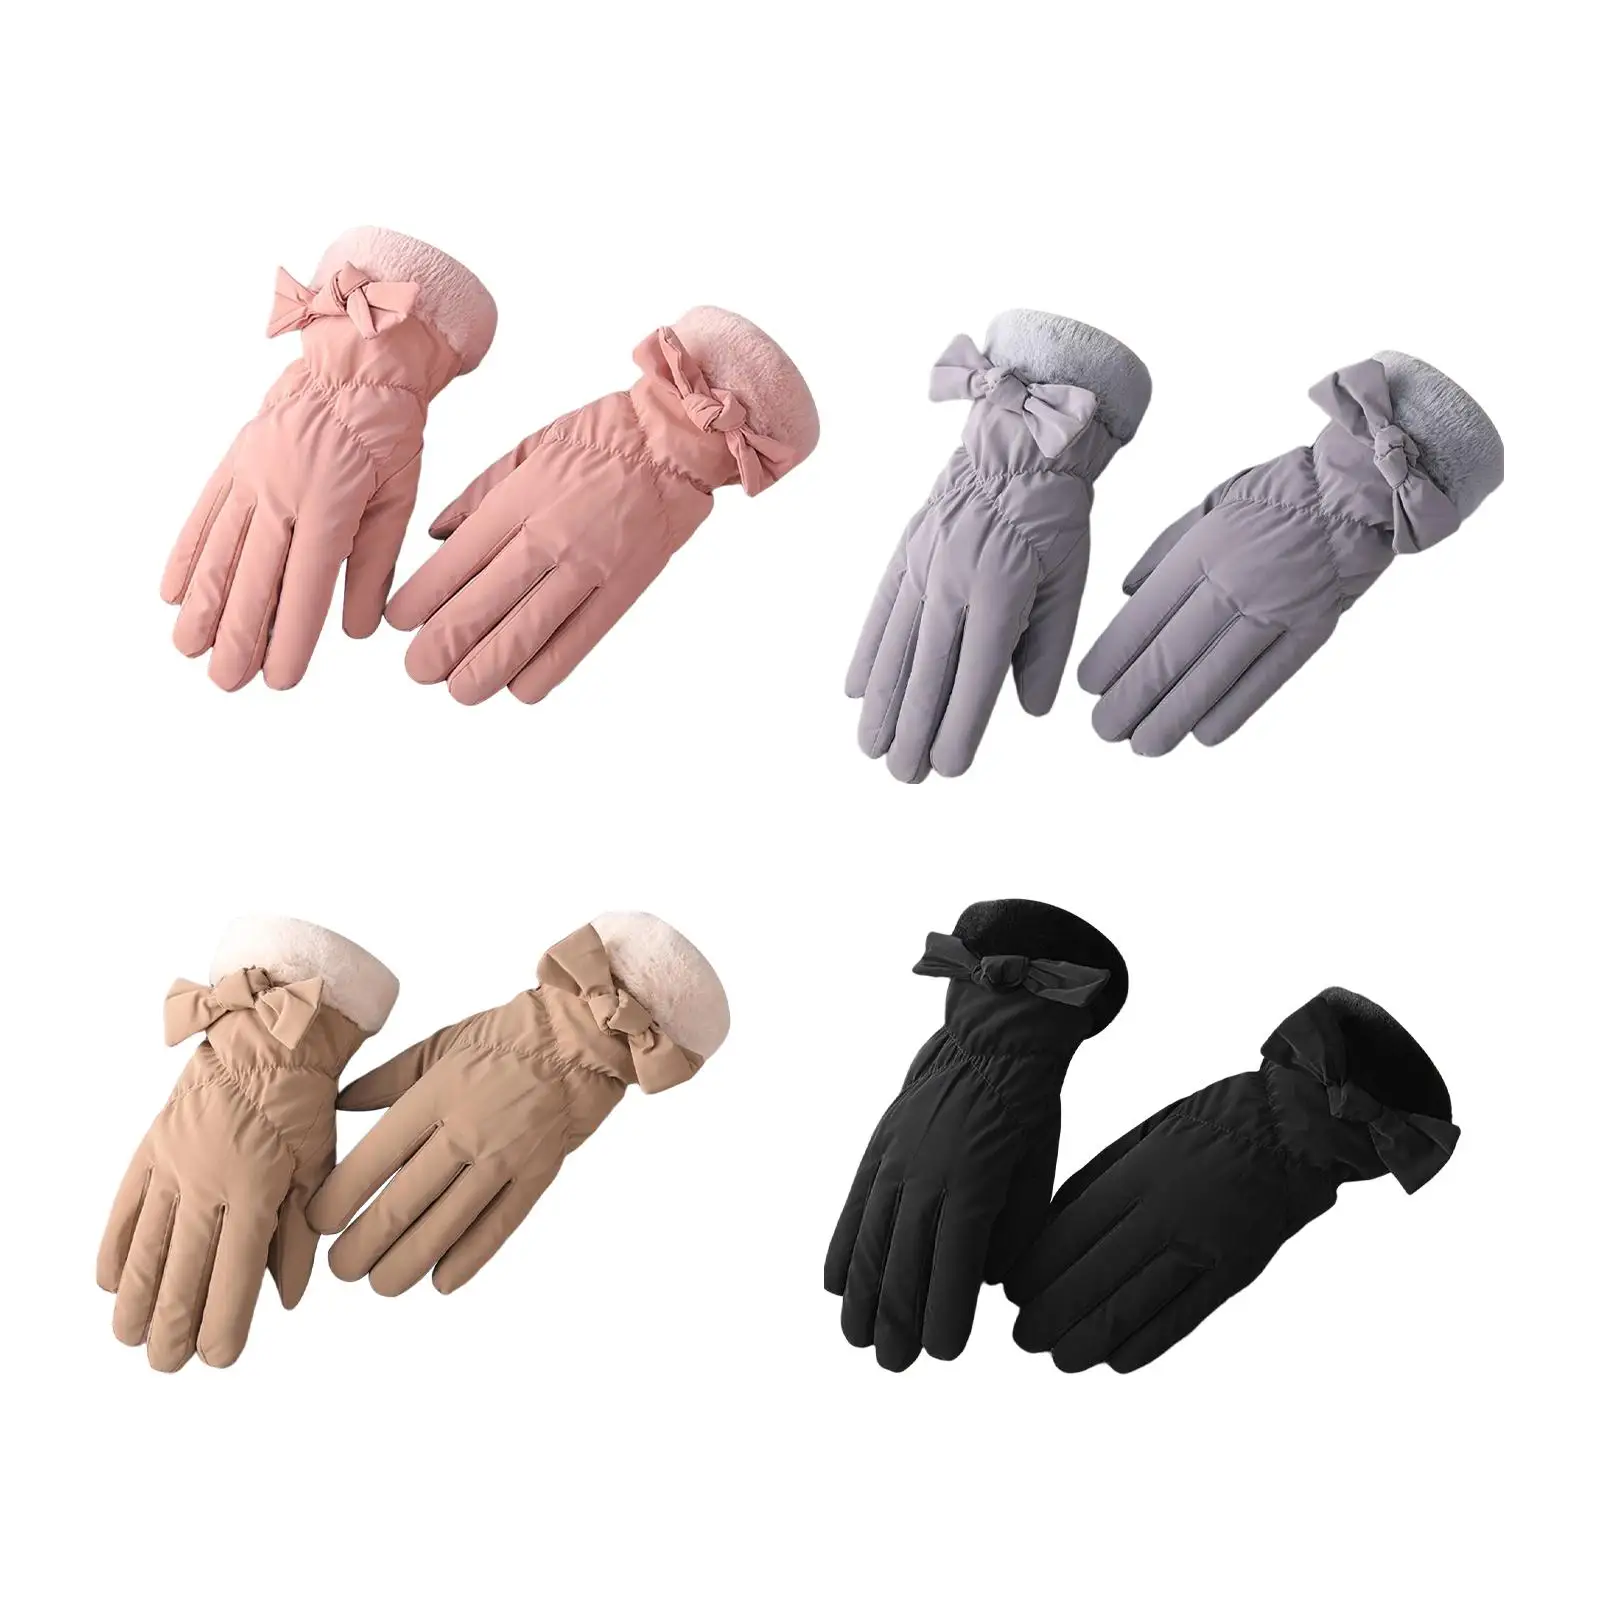 Womens Winter Warm Gloves, Touch Screen Texting Fleece Lined Windproof Driving Gloves Hand Warmer